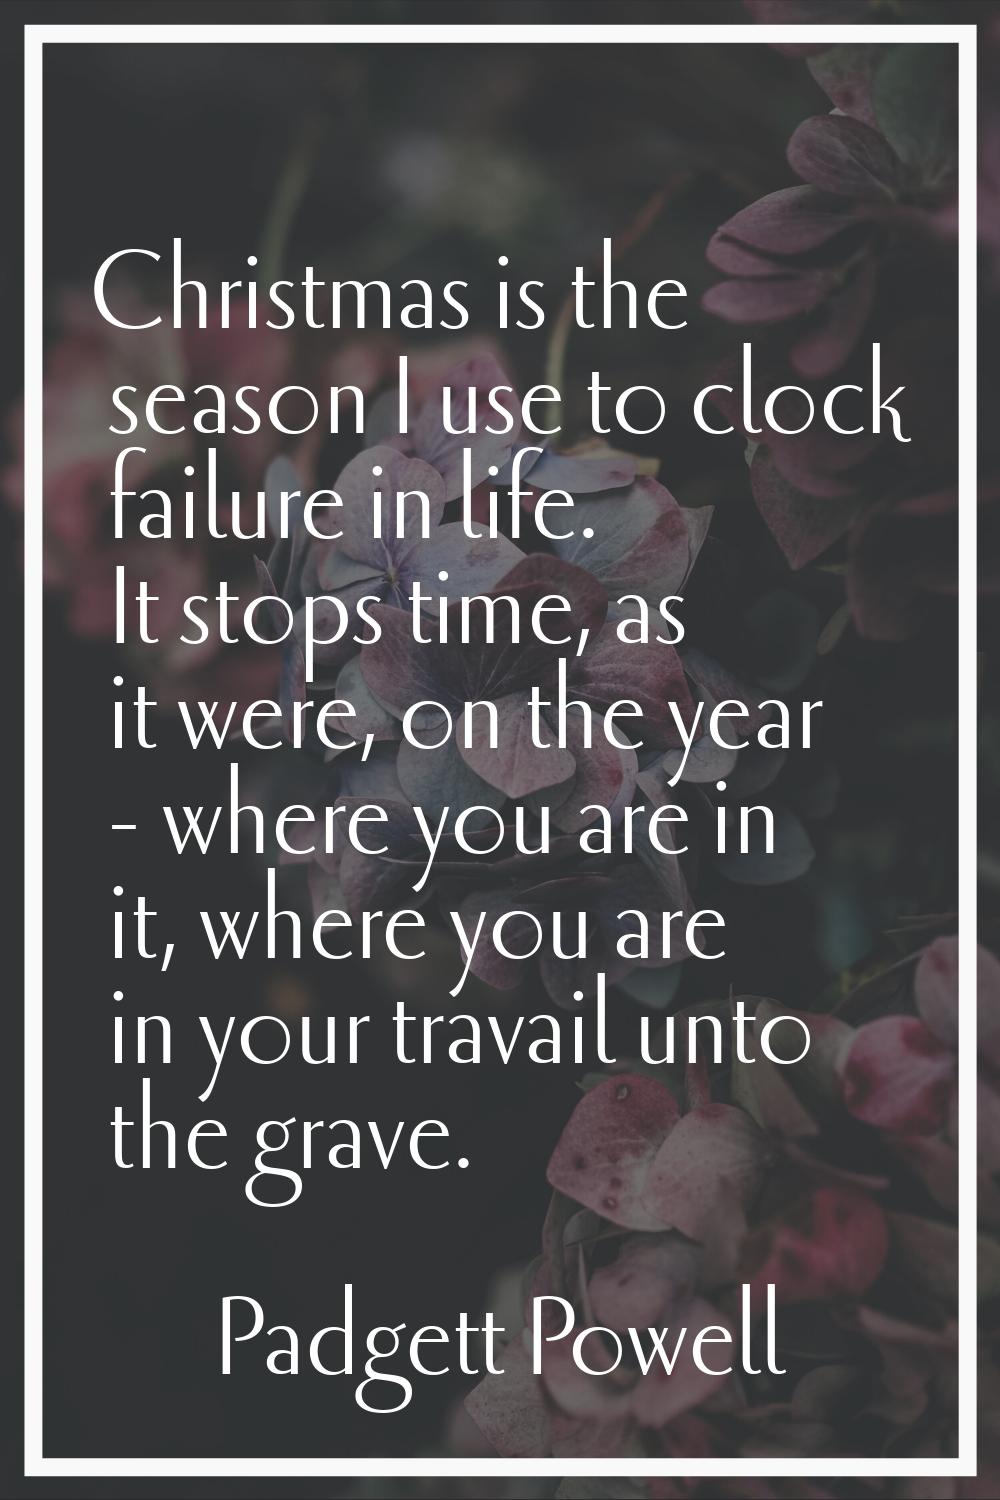 Christmas is the season I use to clock failure in life. It stops time, as it were, on the year - wh